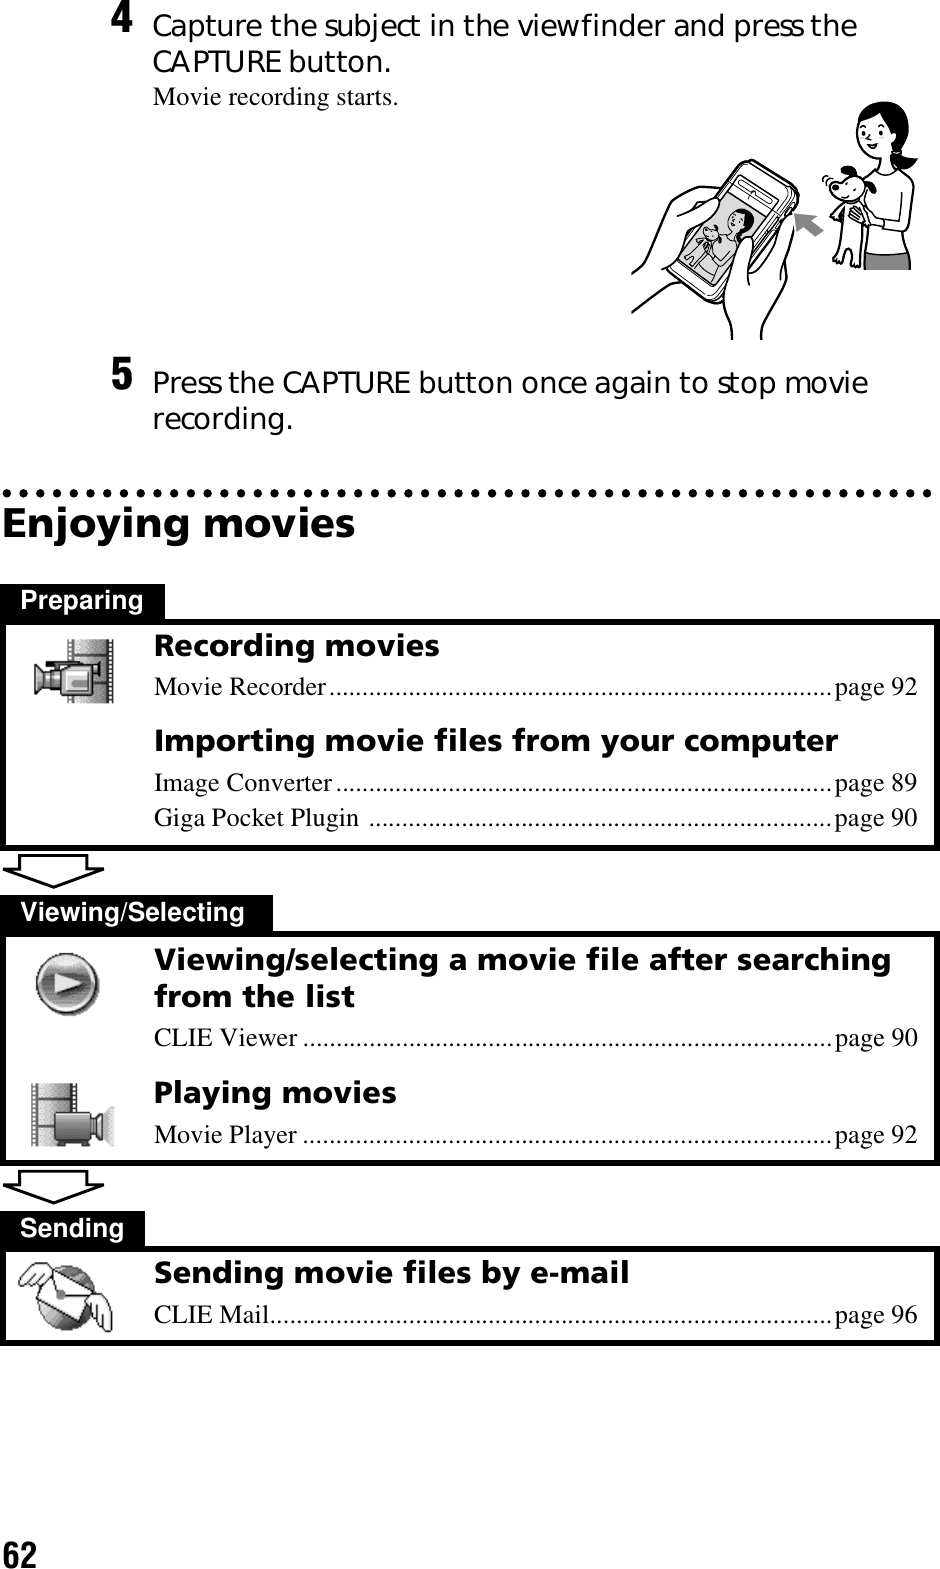 62Enjoying movies4Capture the subject in the viewfinder and press the CAPTURE button.Movie recording starts.5Press the CAPTURE button once again to stop movie recording.PreparingRecording moviesMovie Recorder............................................................................page 92Importing movie files from your computerImage Converter...........................................................................page 89Giga Pocket Plugin ......................................................................page 90Viewing/SelectingViewing/selecting a movie file after searching from the listCLIE Viewer ................................................................................page 90Playing moviesMovie Player ................................................................................page 92SendingSending movie files by e-mailCLIE Mail.....................................................................................page 96